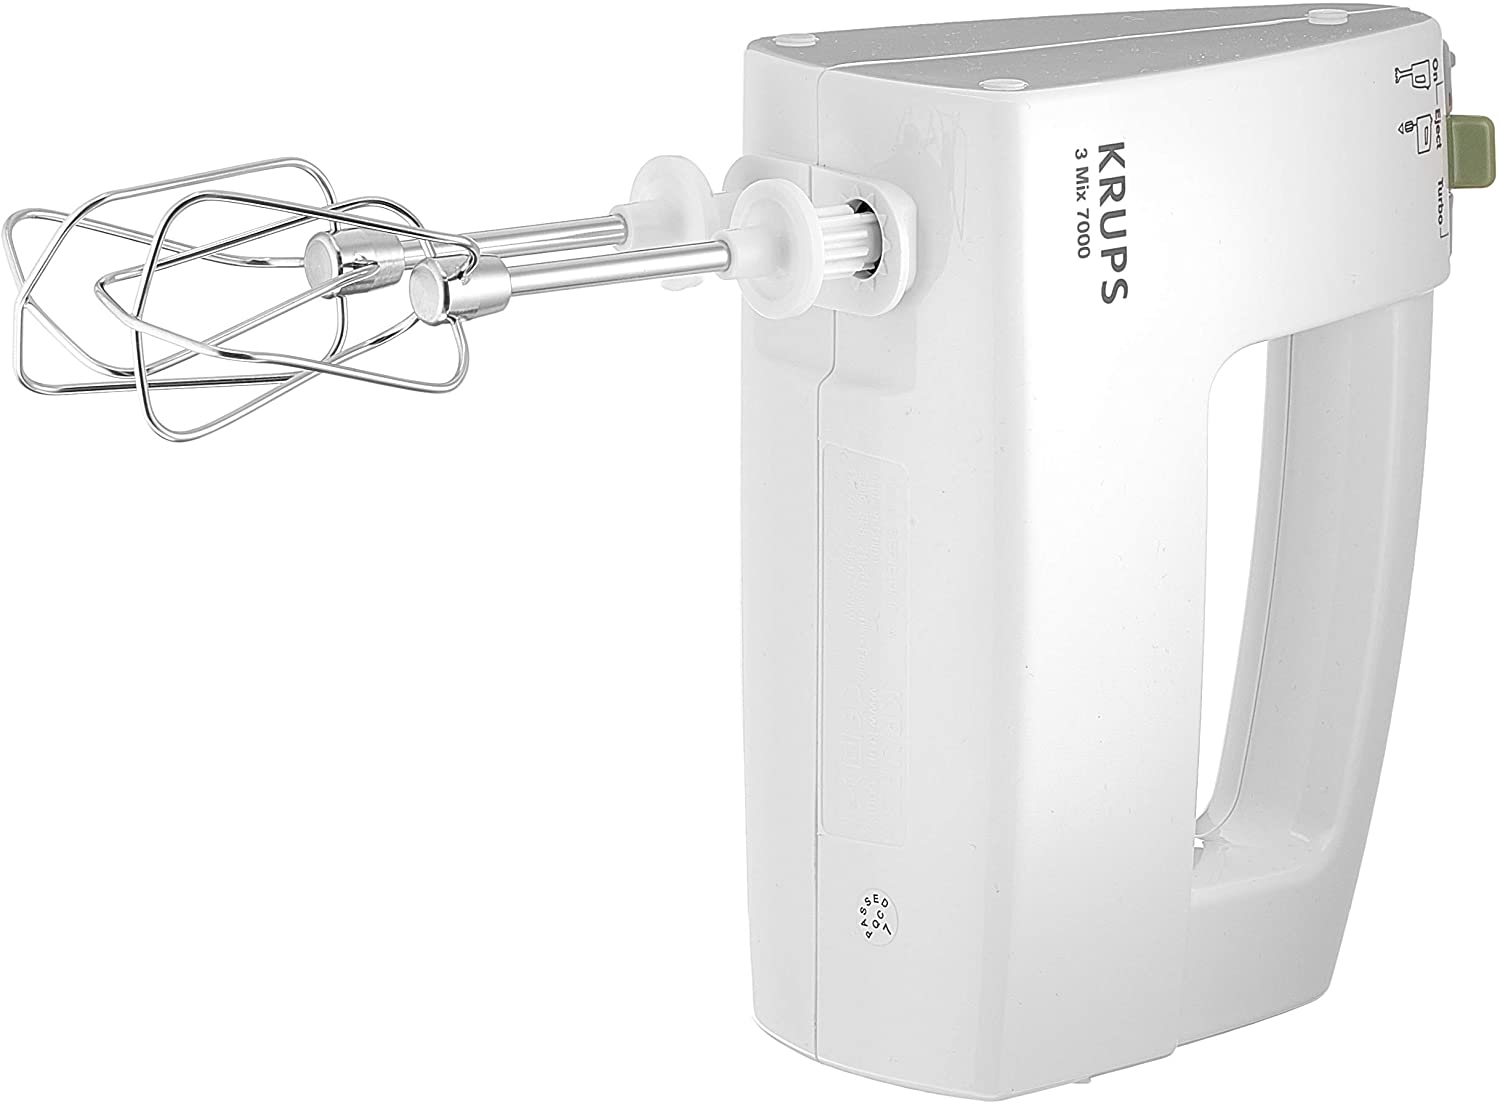 Krups 3 MIX 7000 Hand Mixer 60-Year Edition F6085 500 W Ergonomic Handle 1.65 m Long Cable Speed Control Whisk & Dough Hook Stainless Steel Up to 1 kg Bread Dough Black Copper